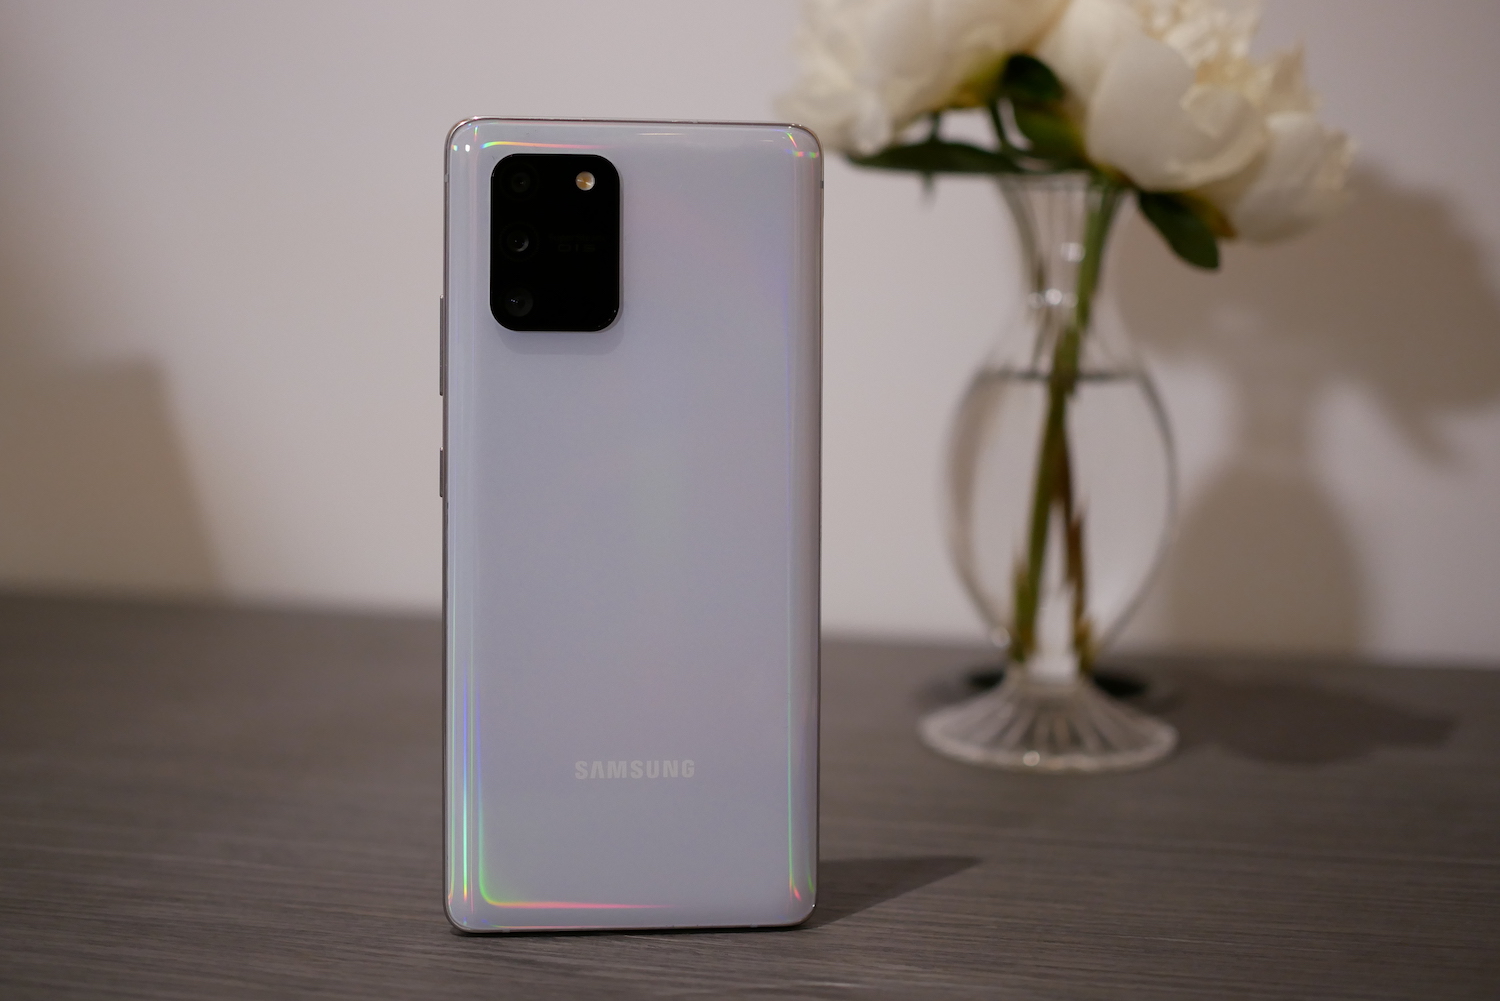 Hands-on with Samsung Lite: Galaxy Note 10 and S10 push prices and features  south - CNET